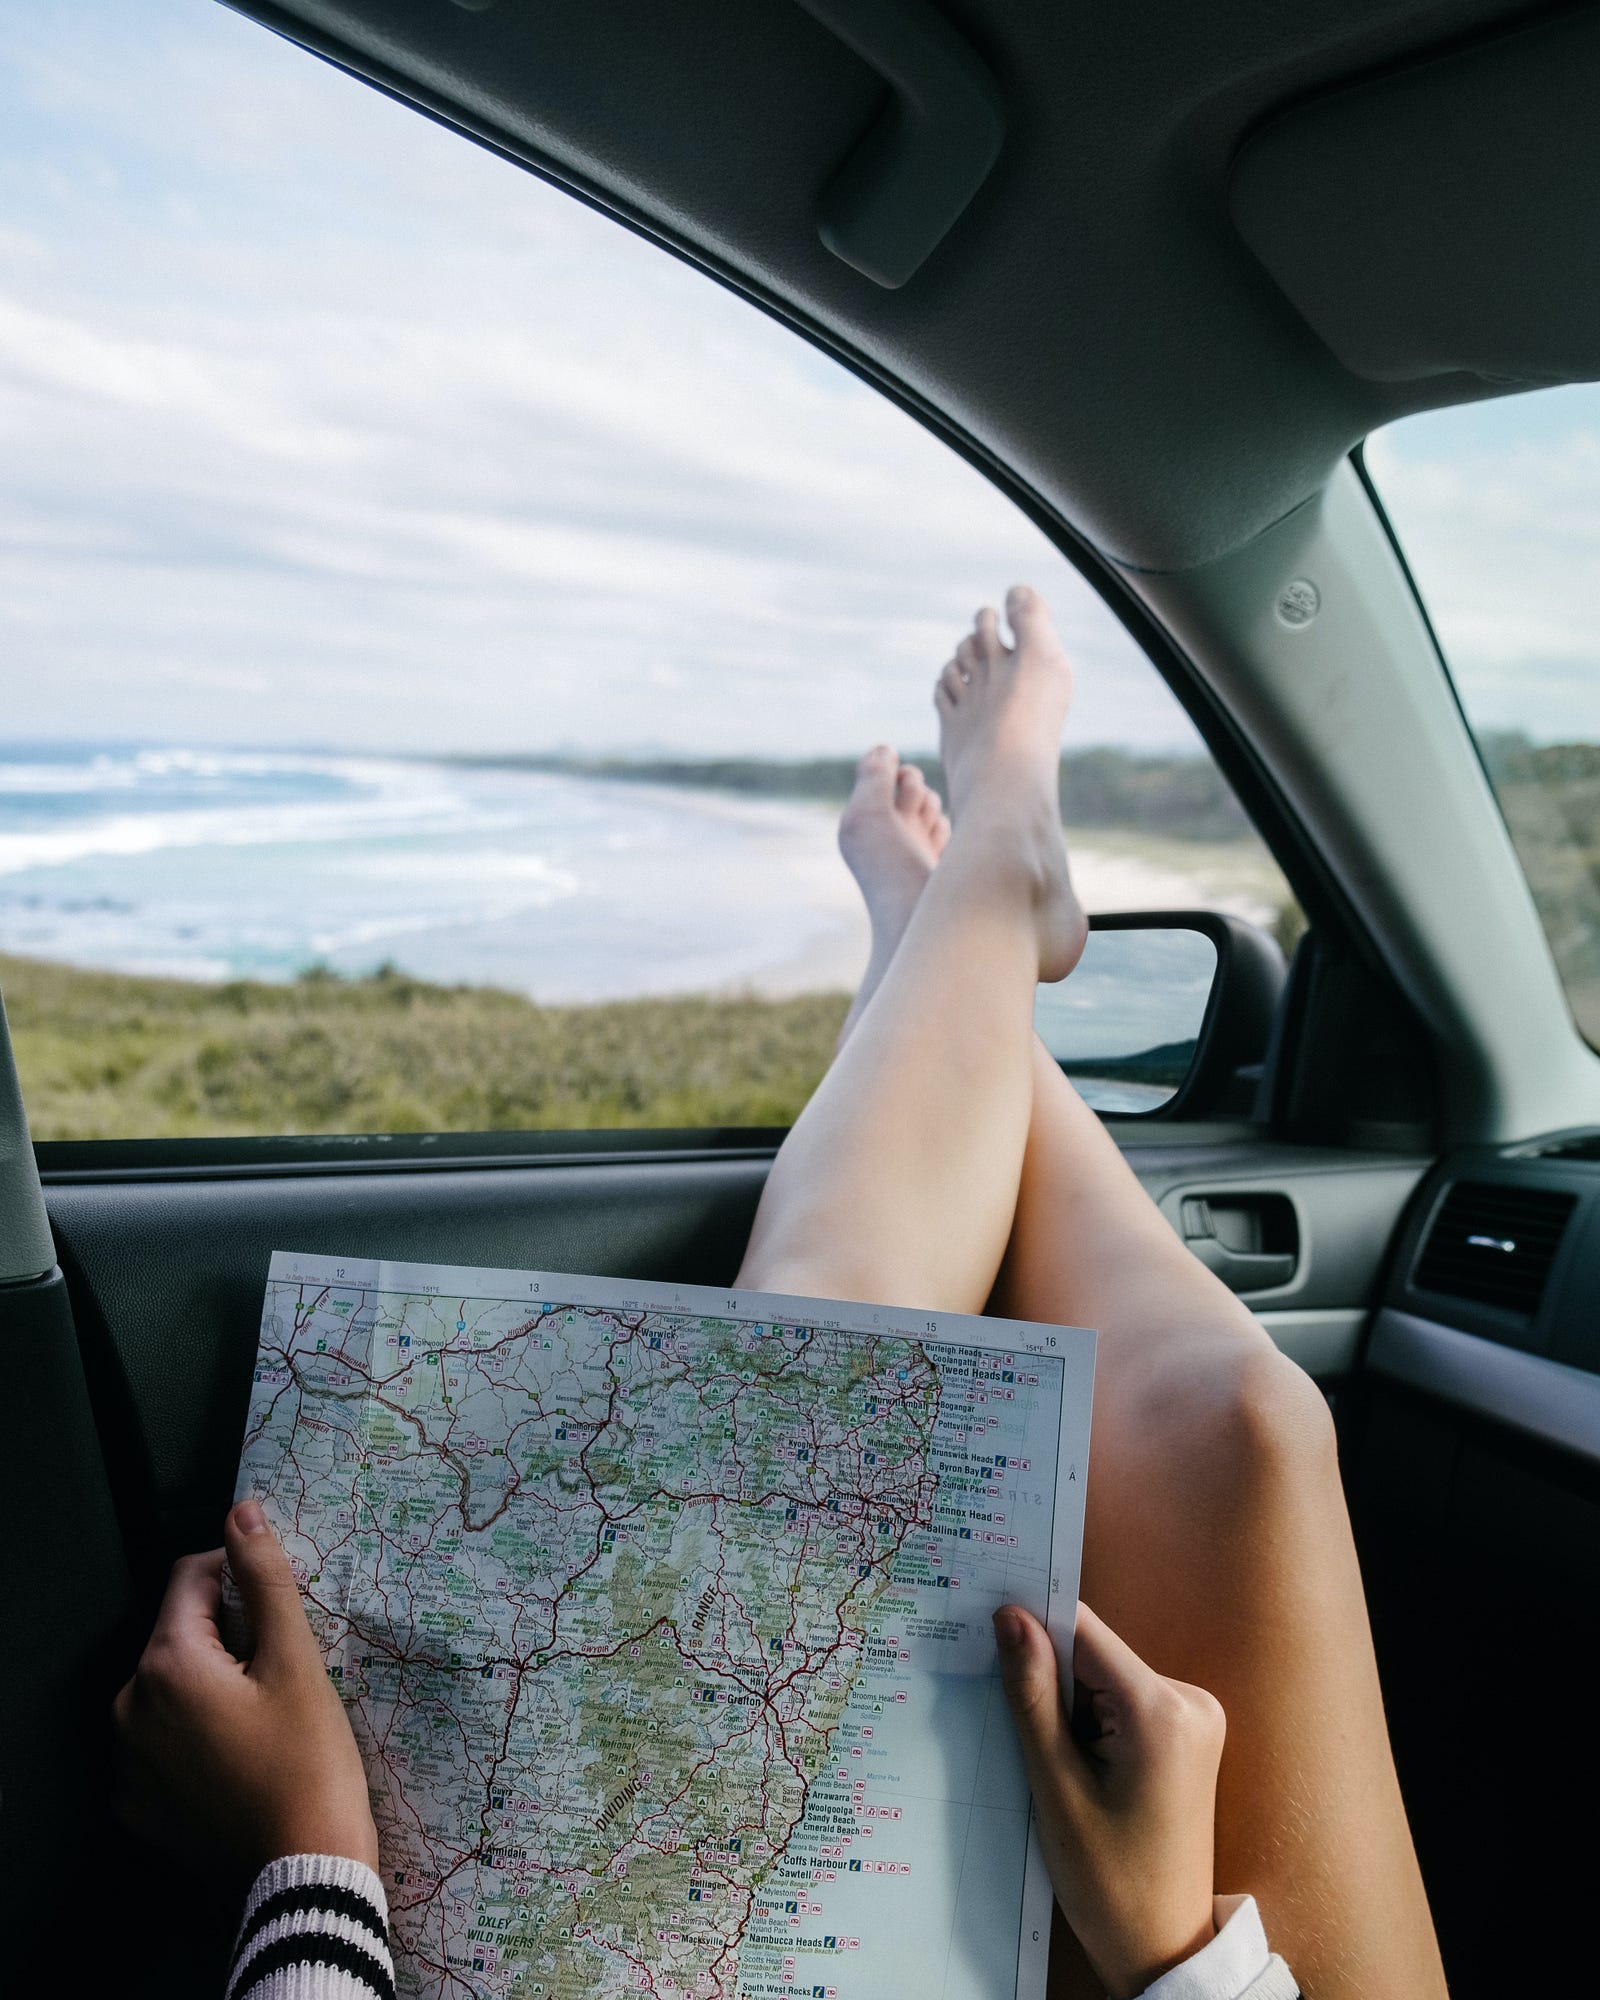 A girl holding a map, ridding in a car with her feet hanging out the window